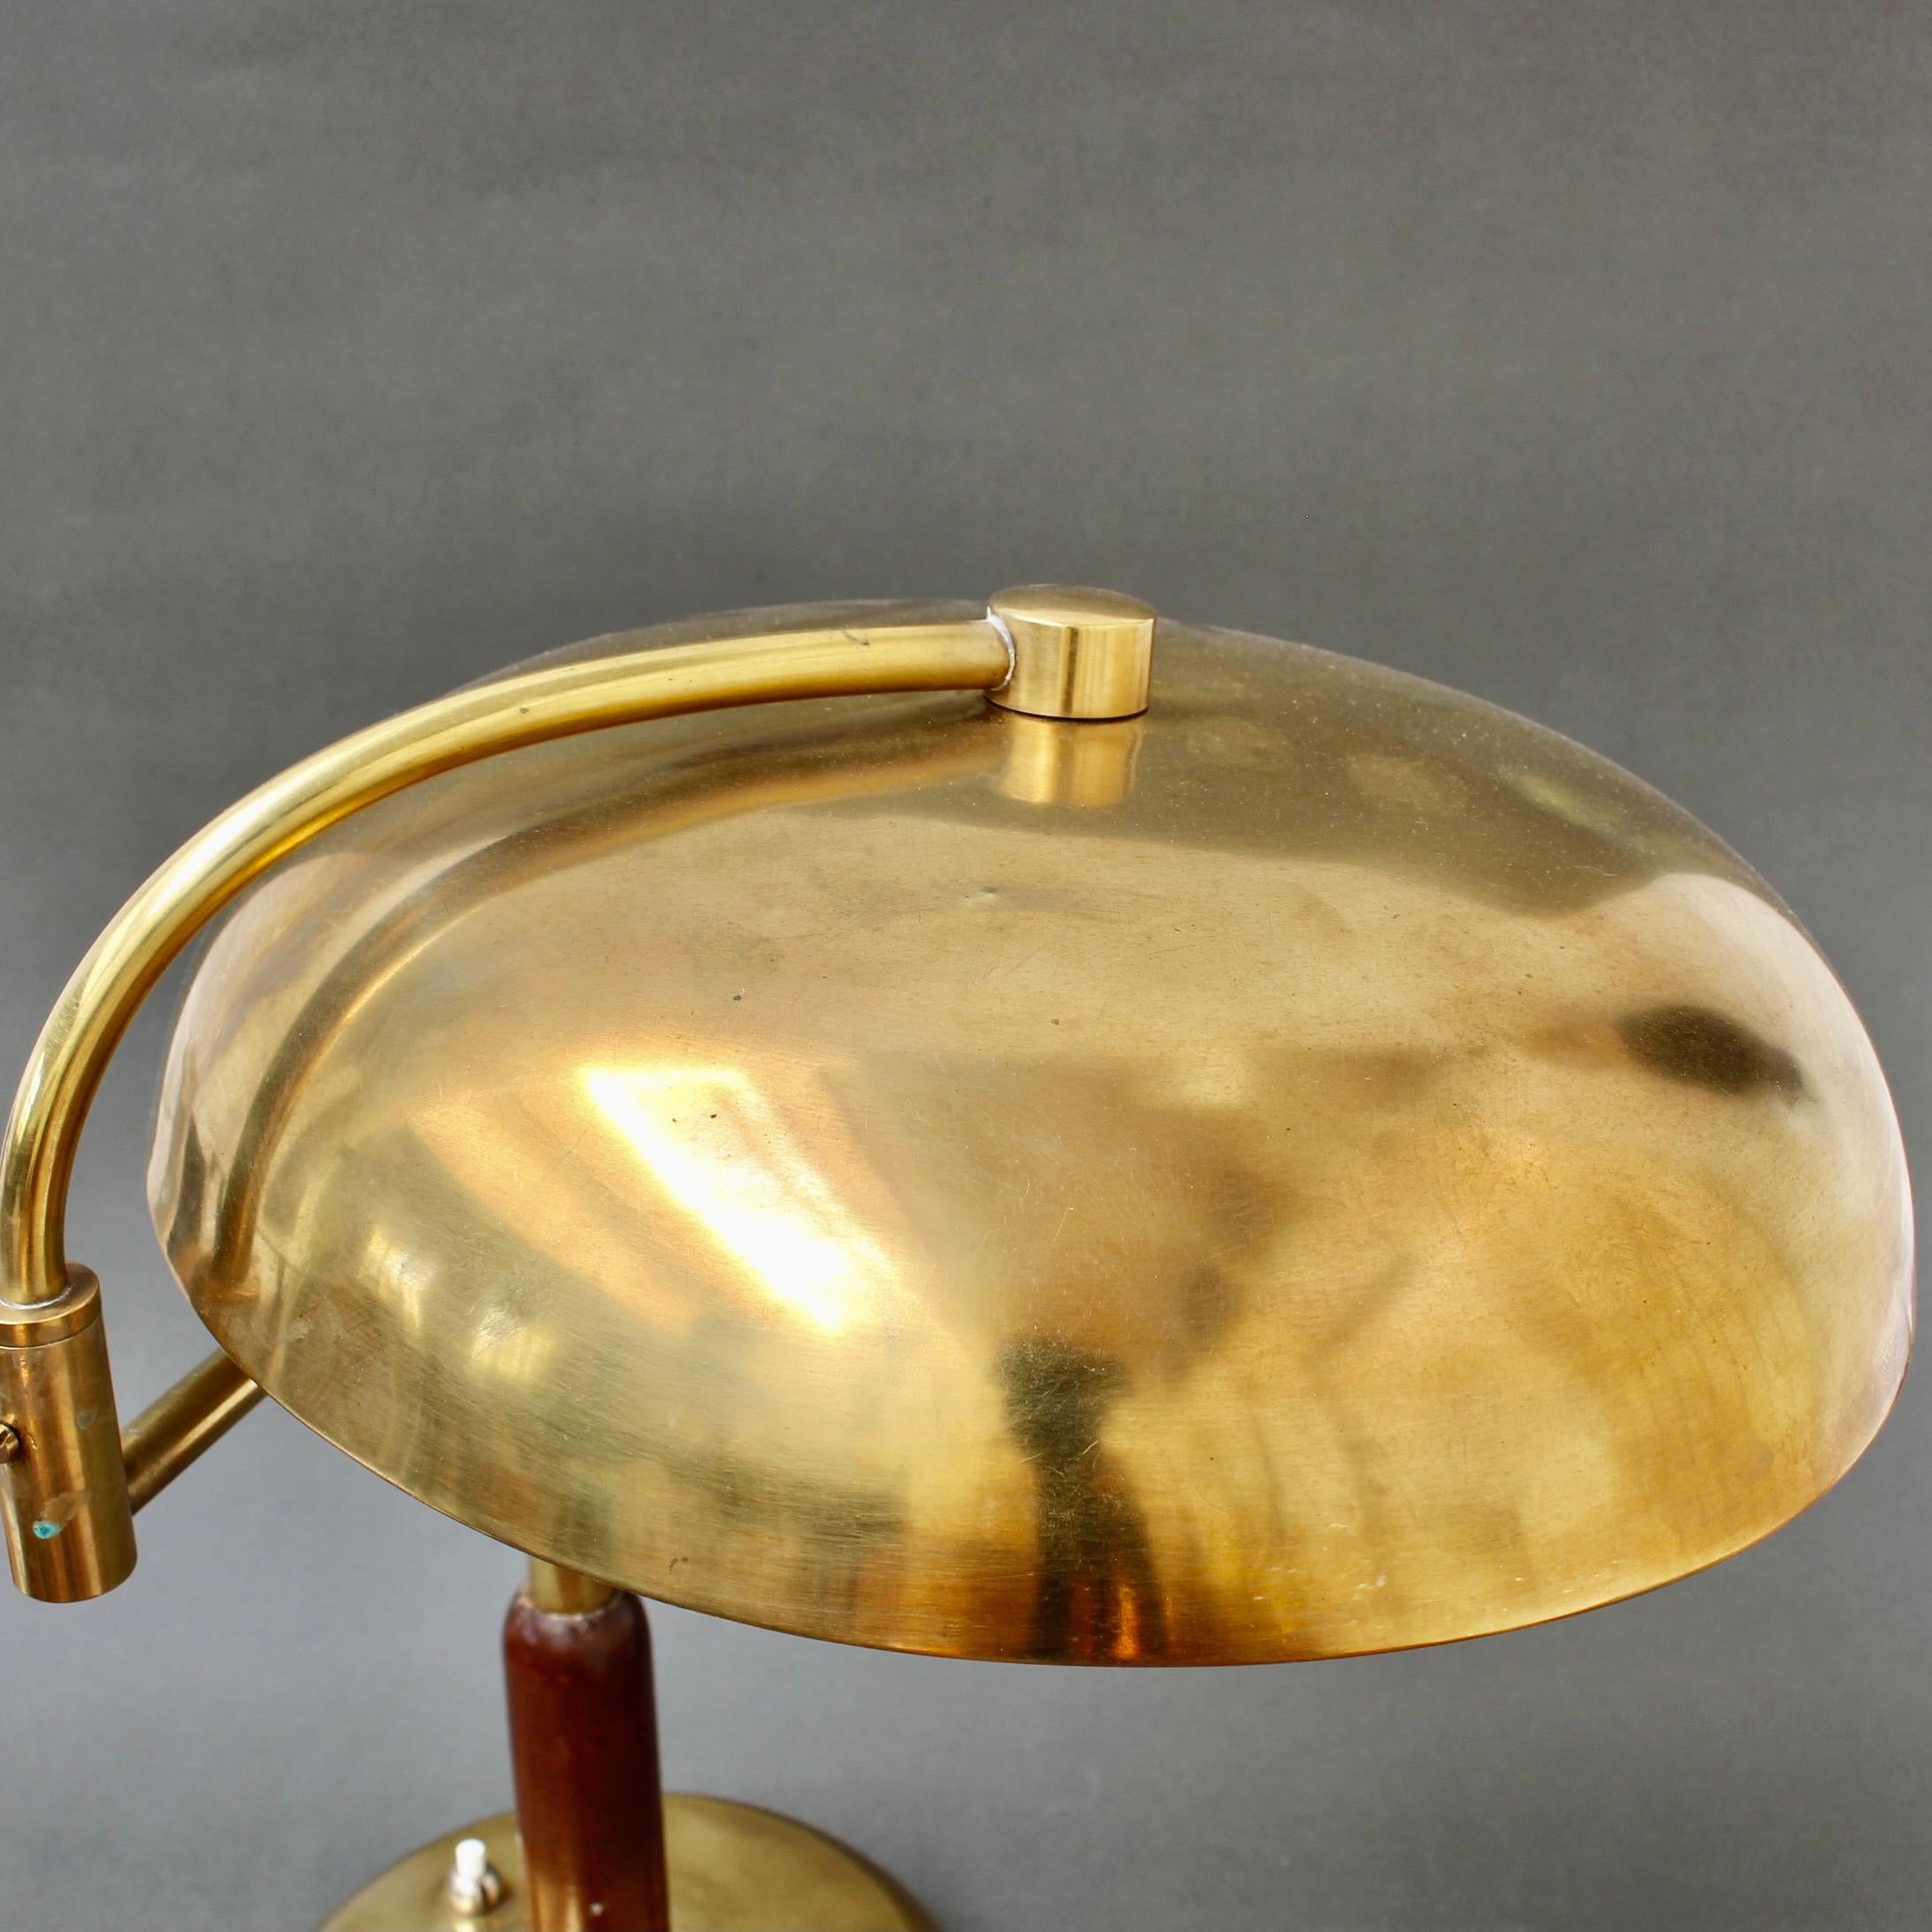 Italian Mid-Century Brass Table Lamp with Swivel Arm, circa 1950s For Sale 7